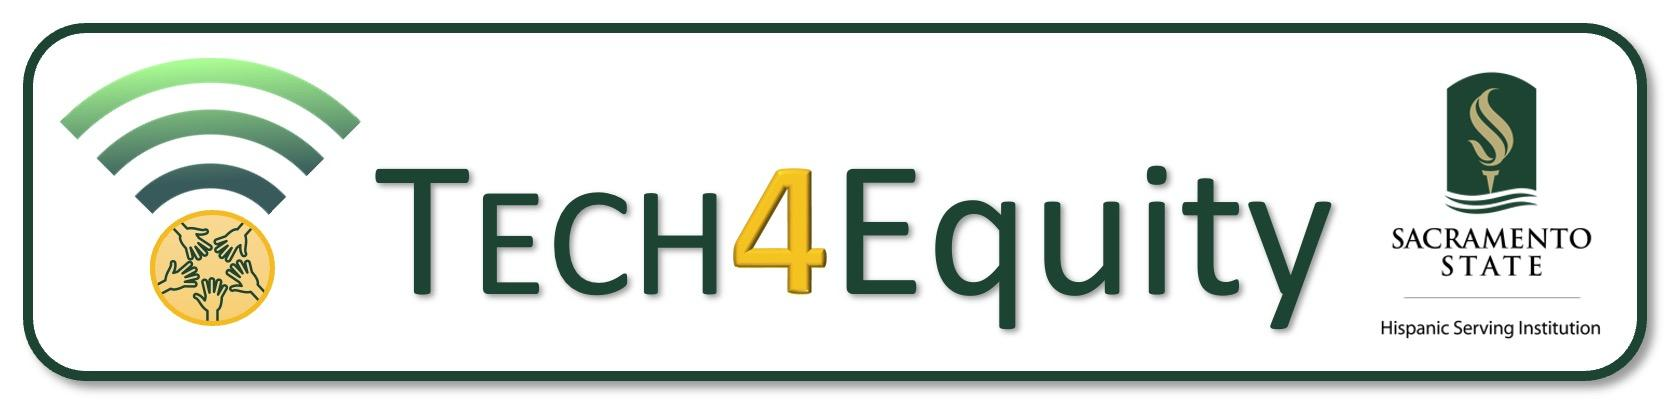 tech4equity header banner with the Sac State logo